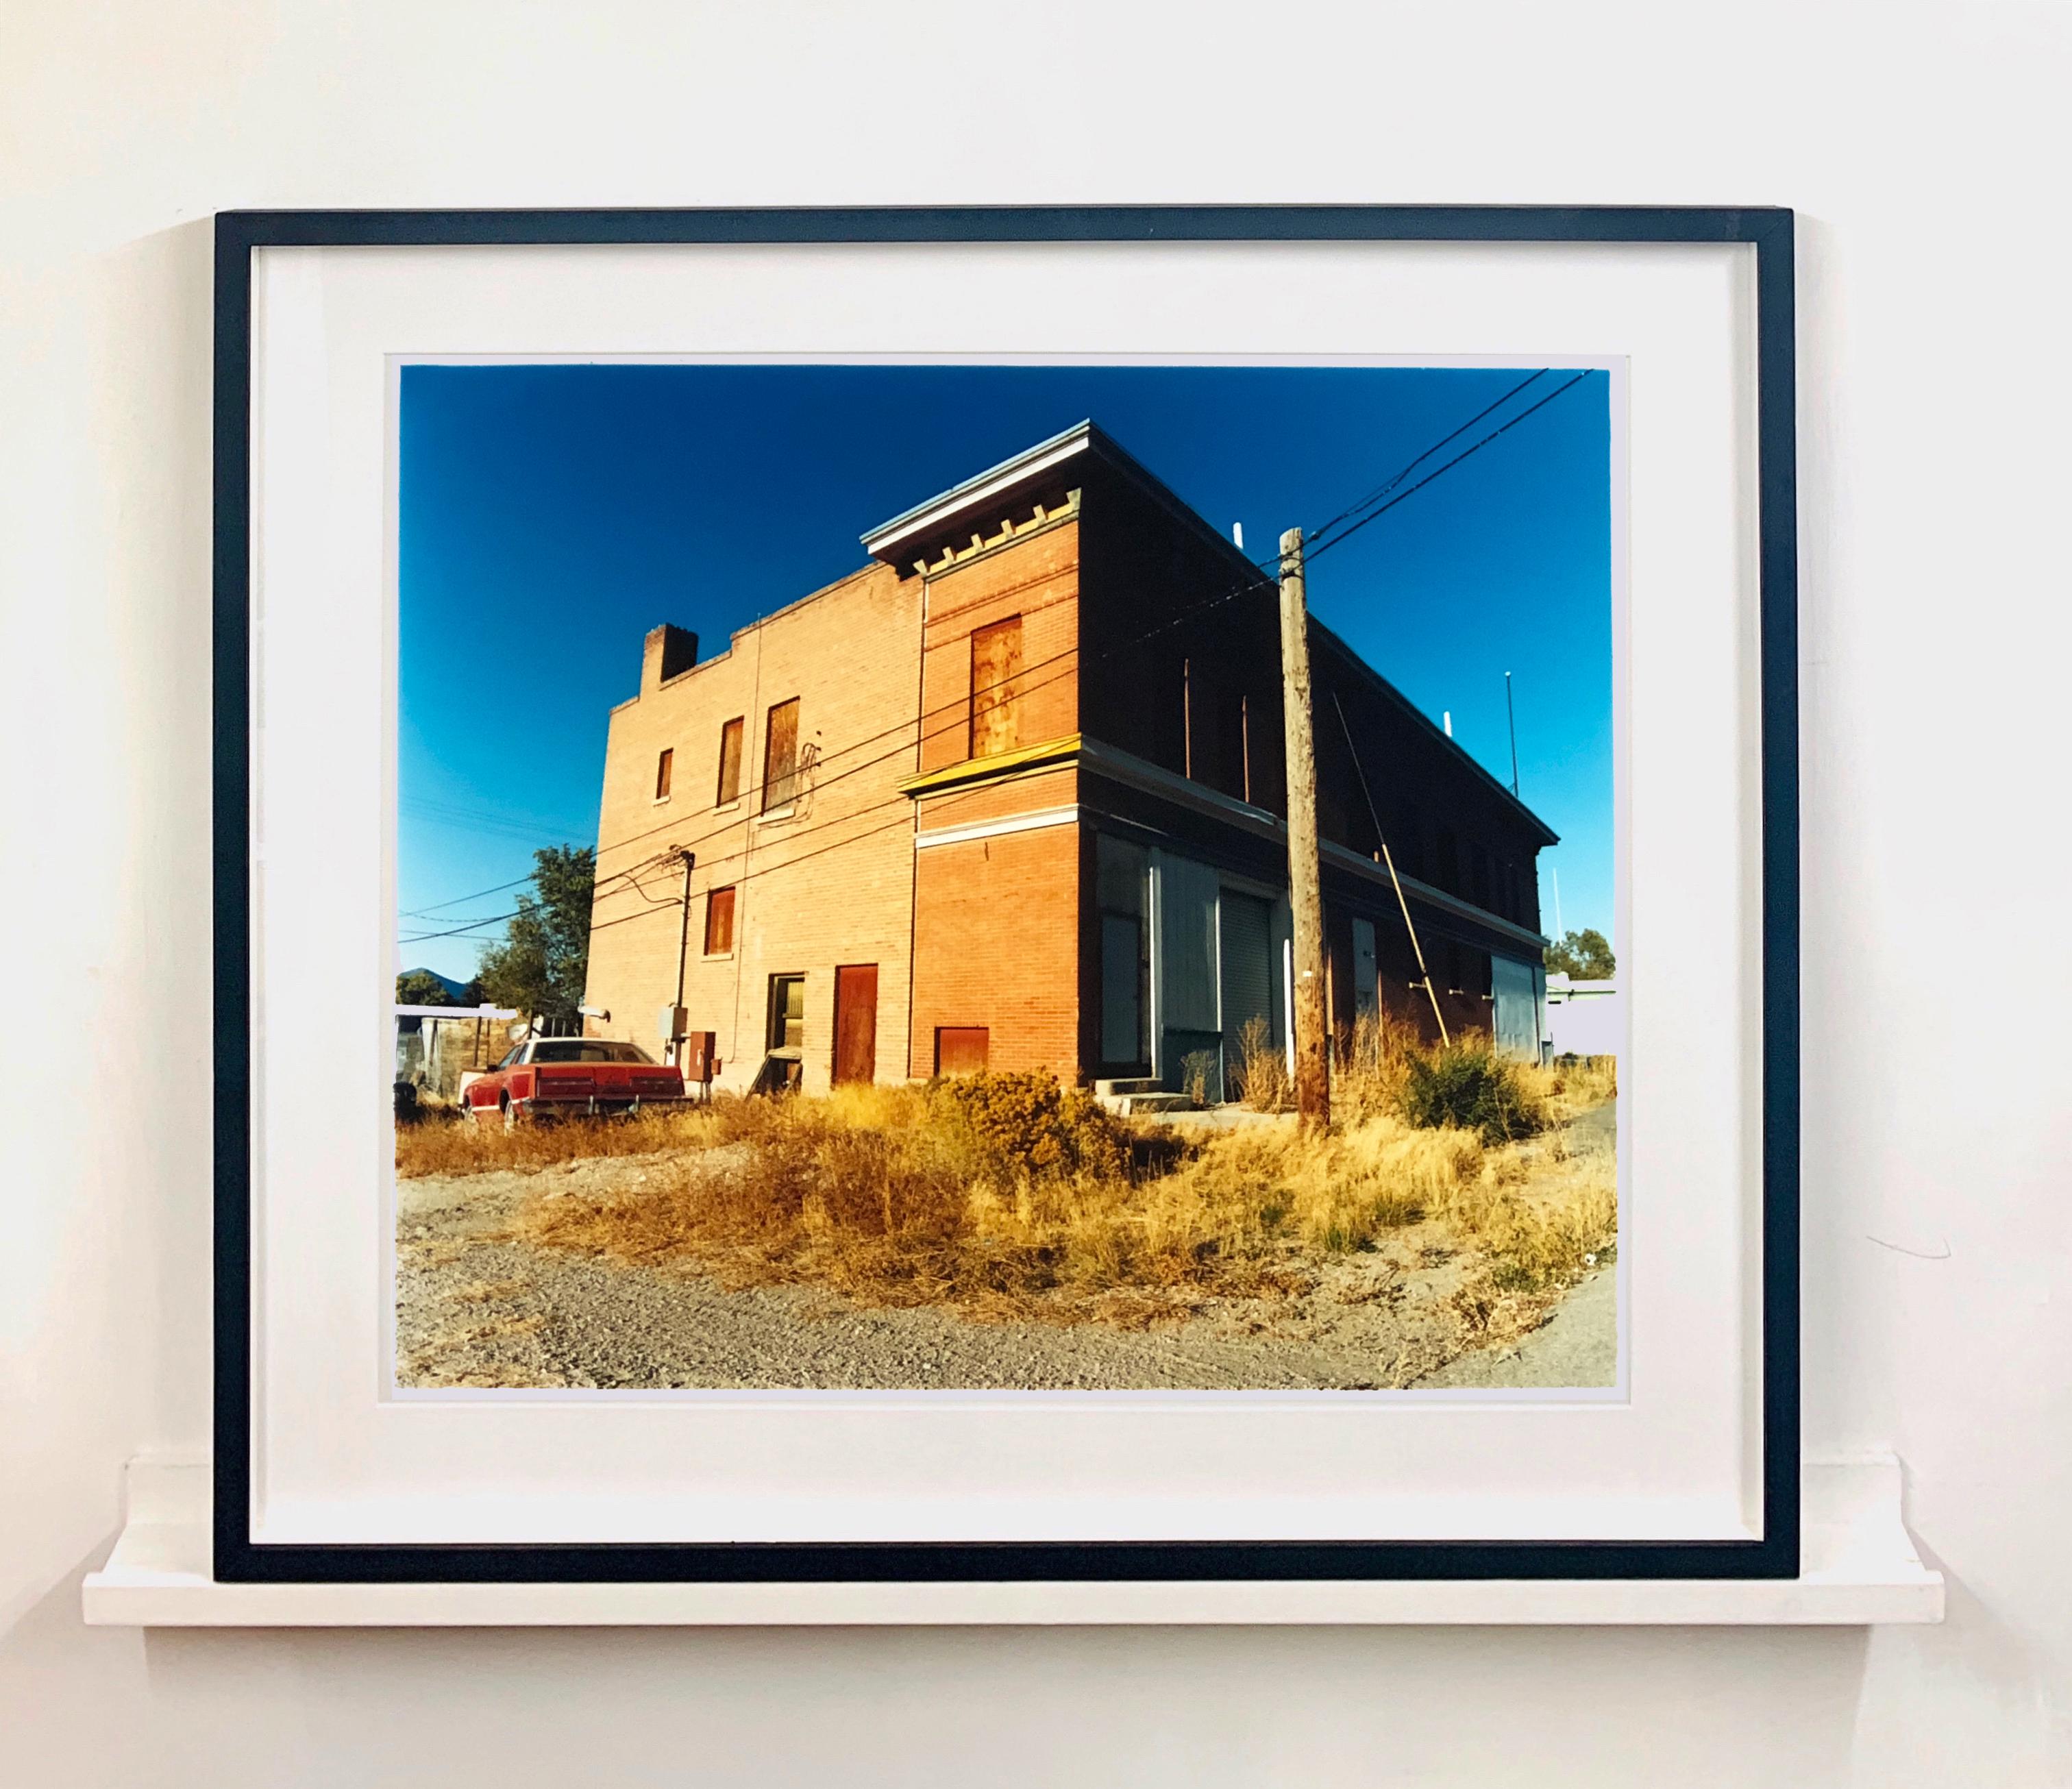 'High Street', Ely, Nevada - After the Gold Rush - Architecture Color Photo - Contemporary Print by Richard Heeps